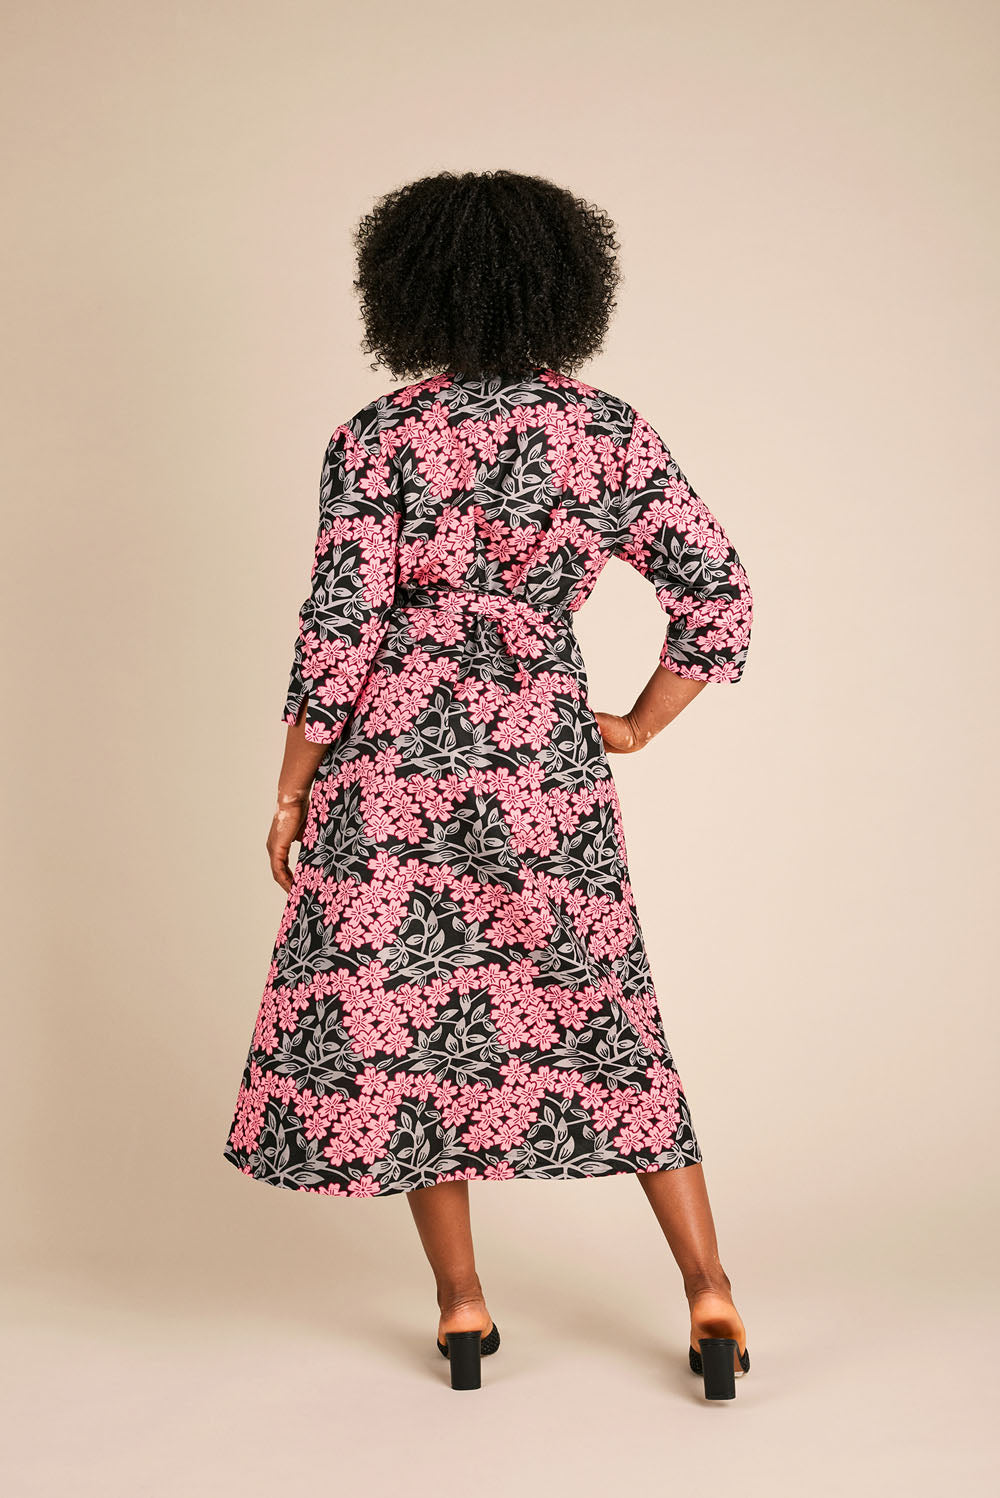 Dalitso Maxi Wrap Dress with sleeves in Pink and Black Flowerbed